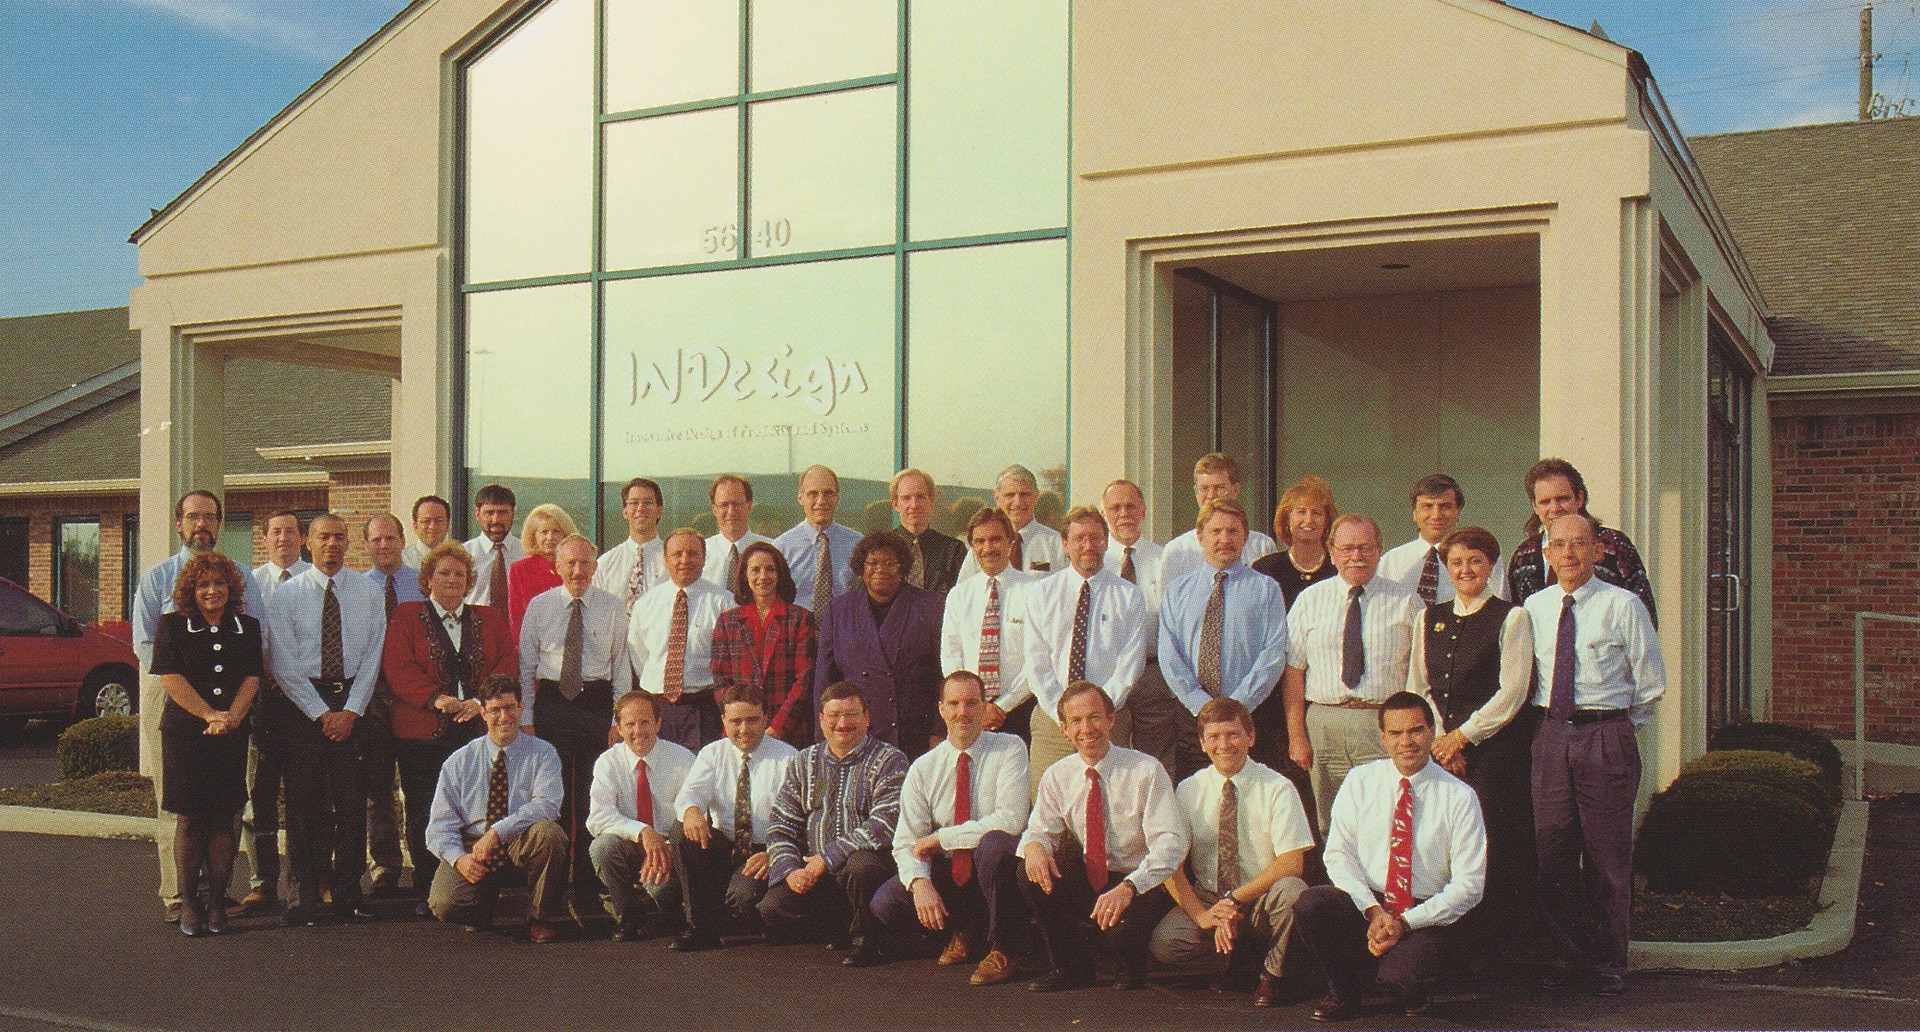 Indesign's First Office in Indianapolis